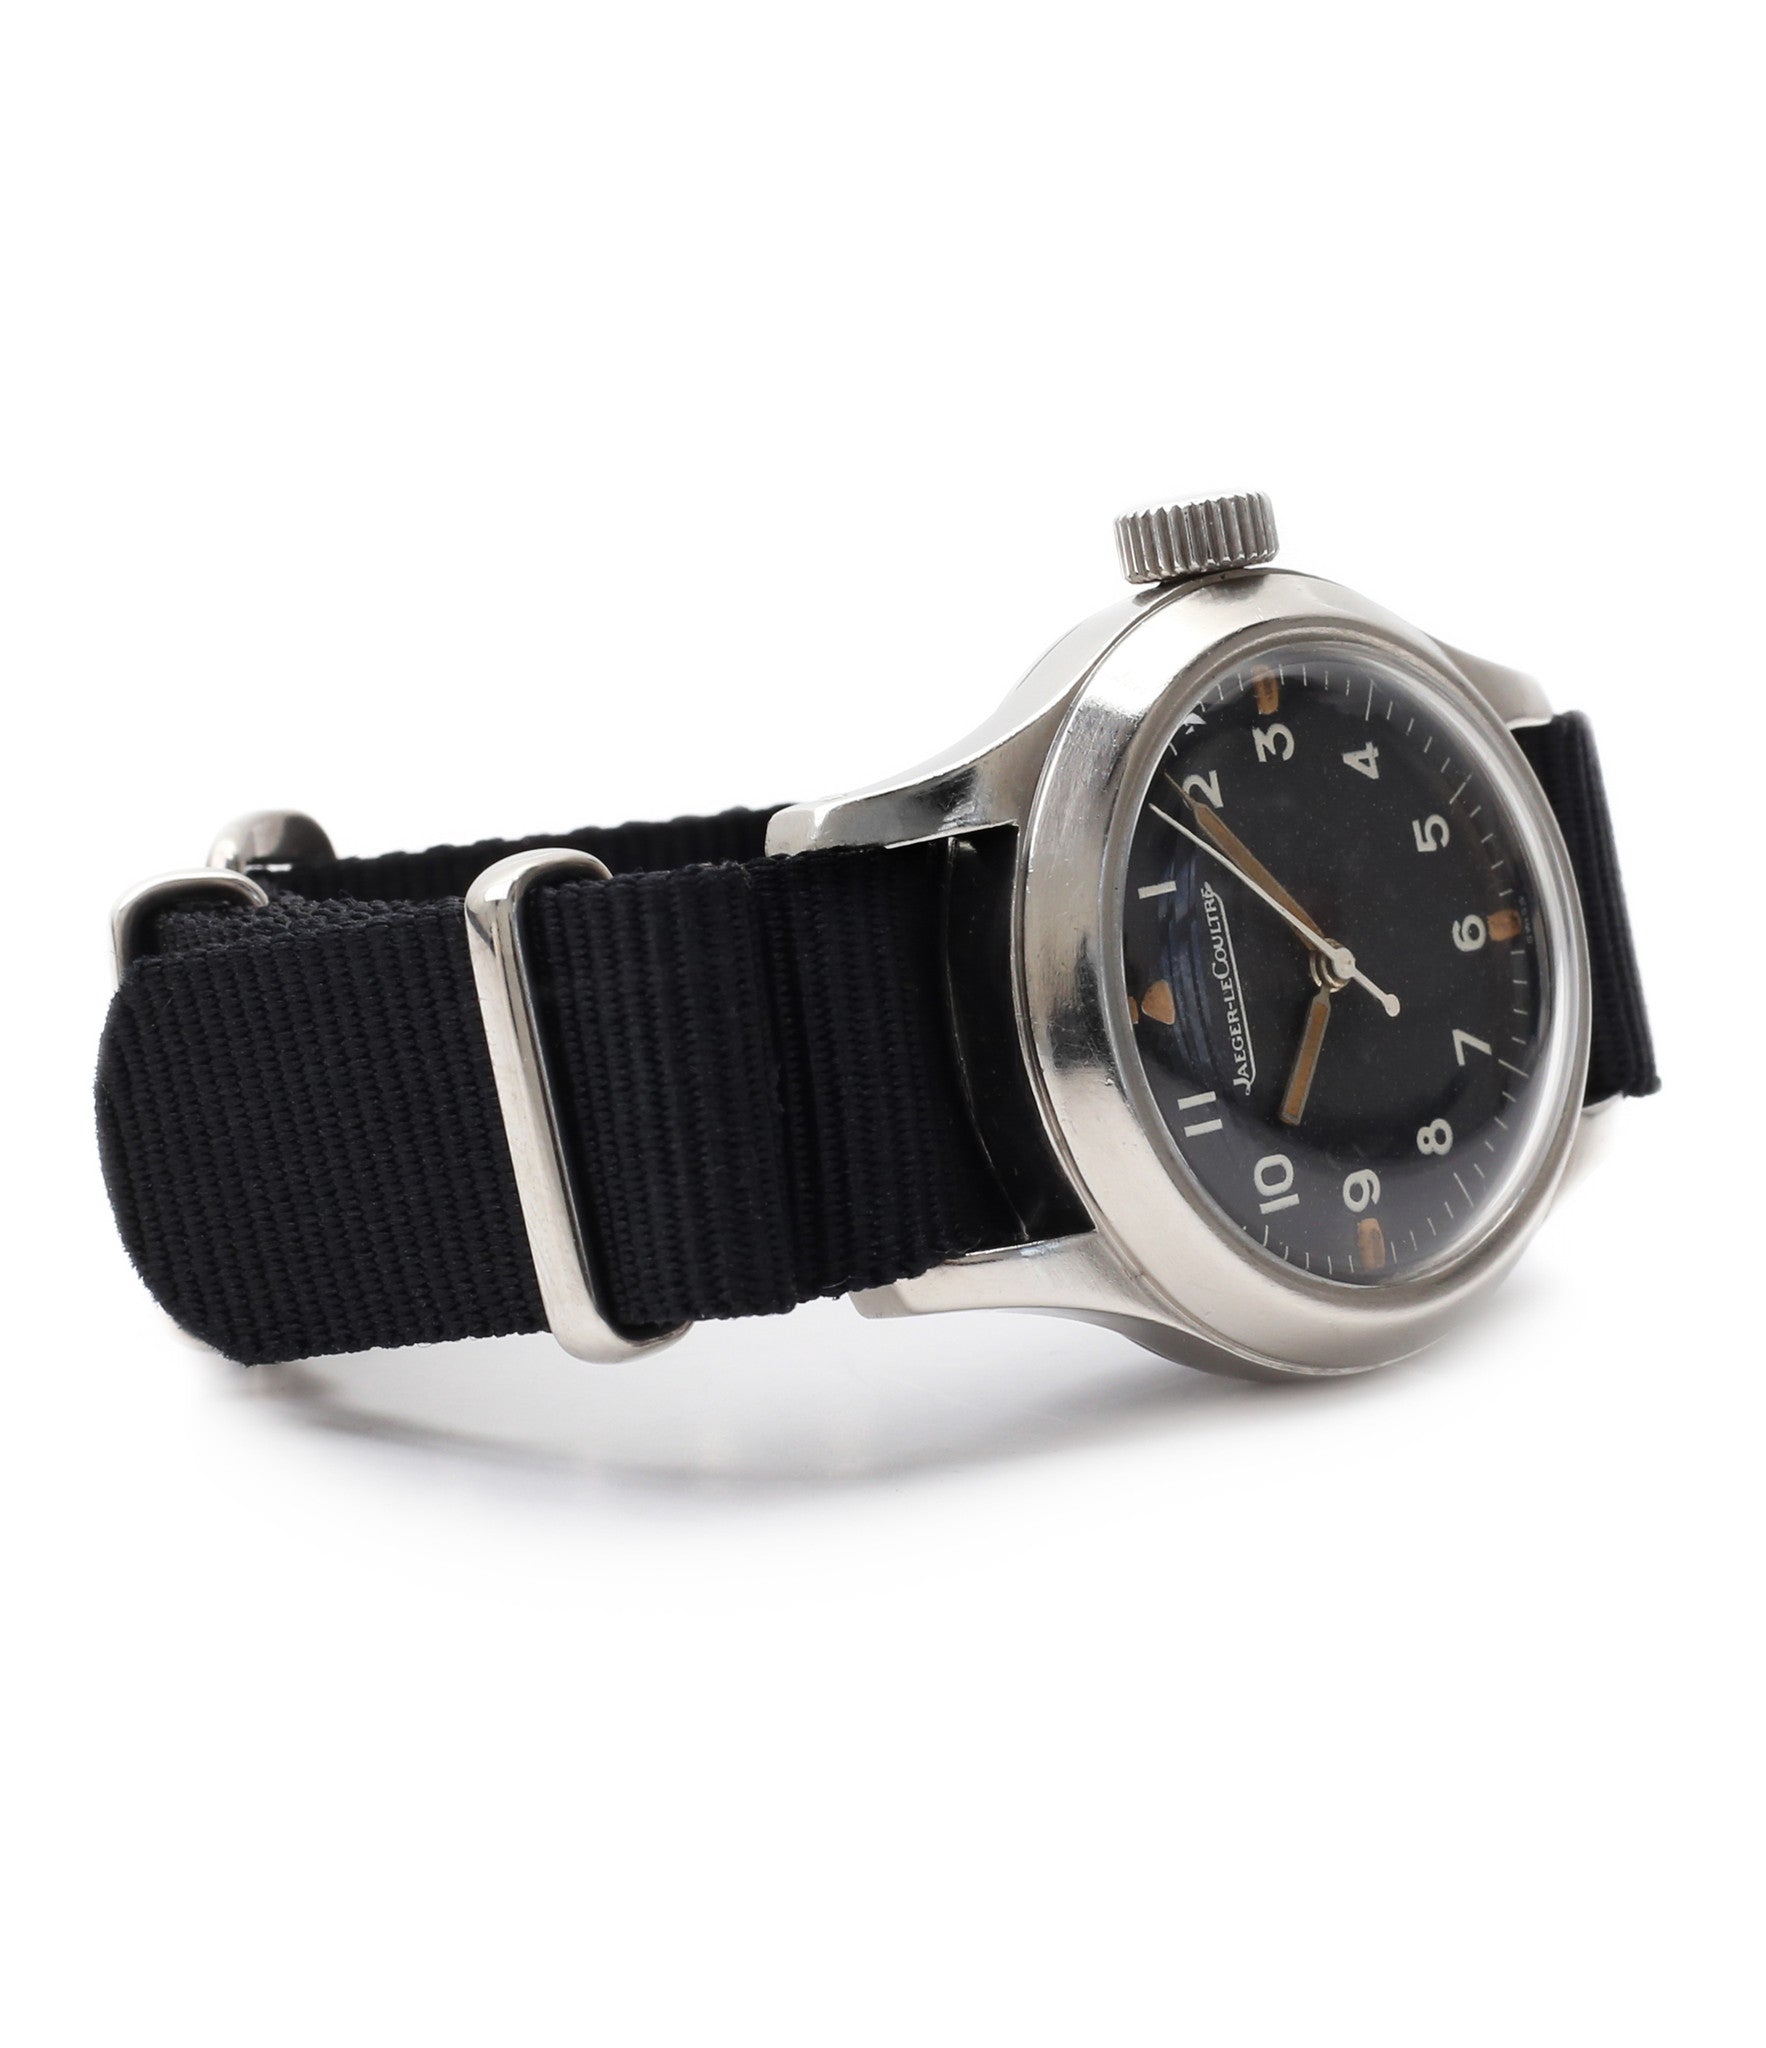 buy vintage military Australian Jaeger-LeCoultre Mark 11 RAAF Air Force pilot watch G6B/346 watch for sale online at A Collected Man London vintage military watch specialist